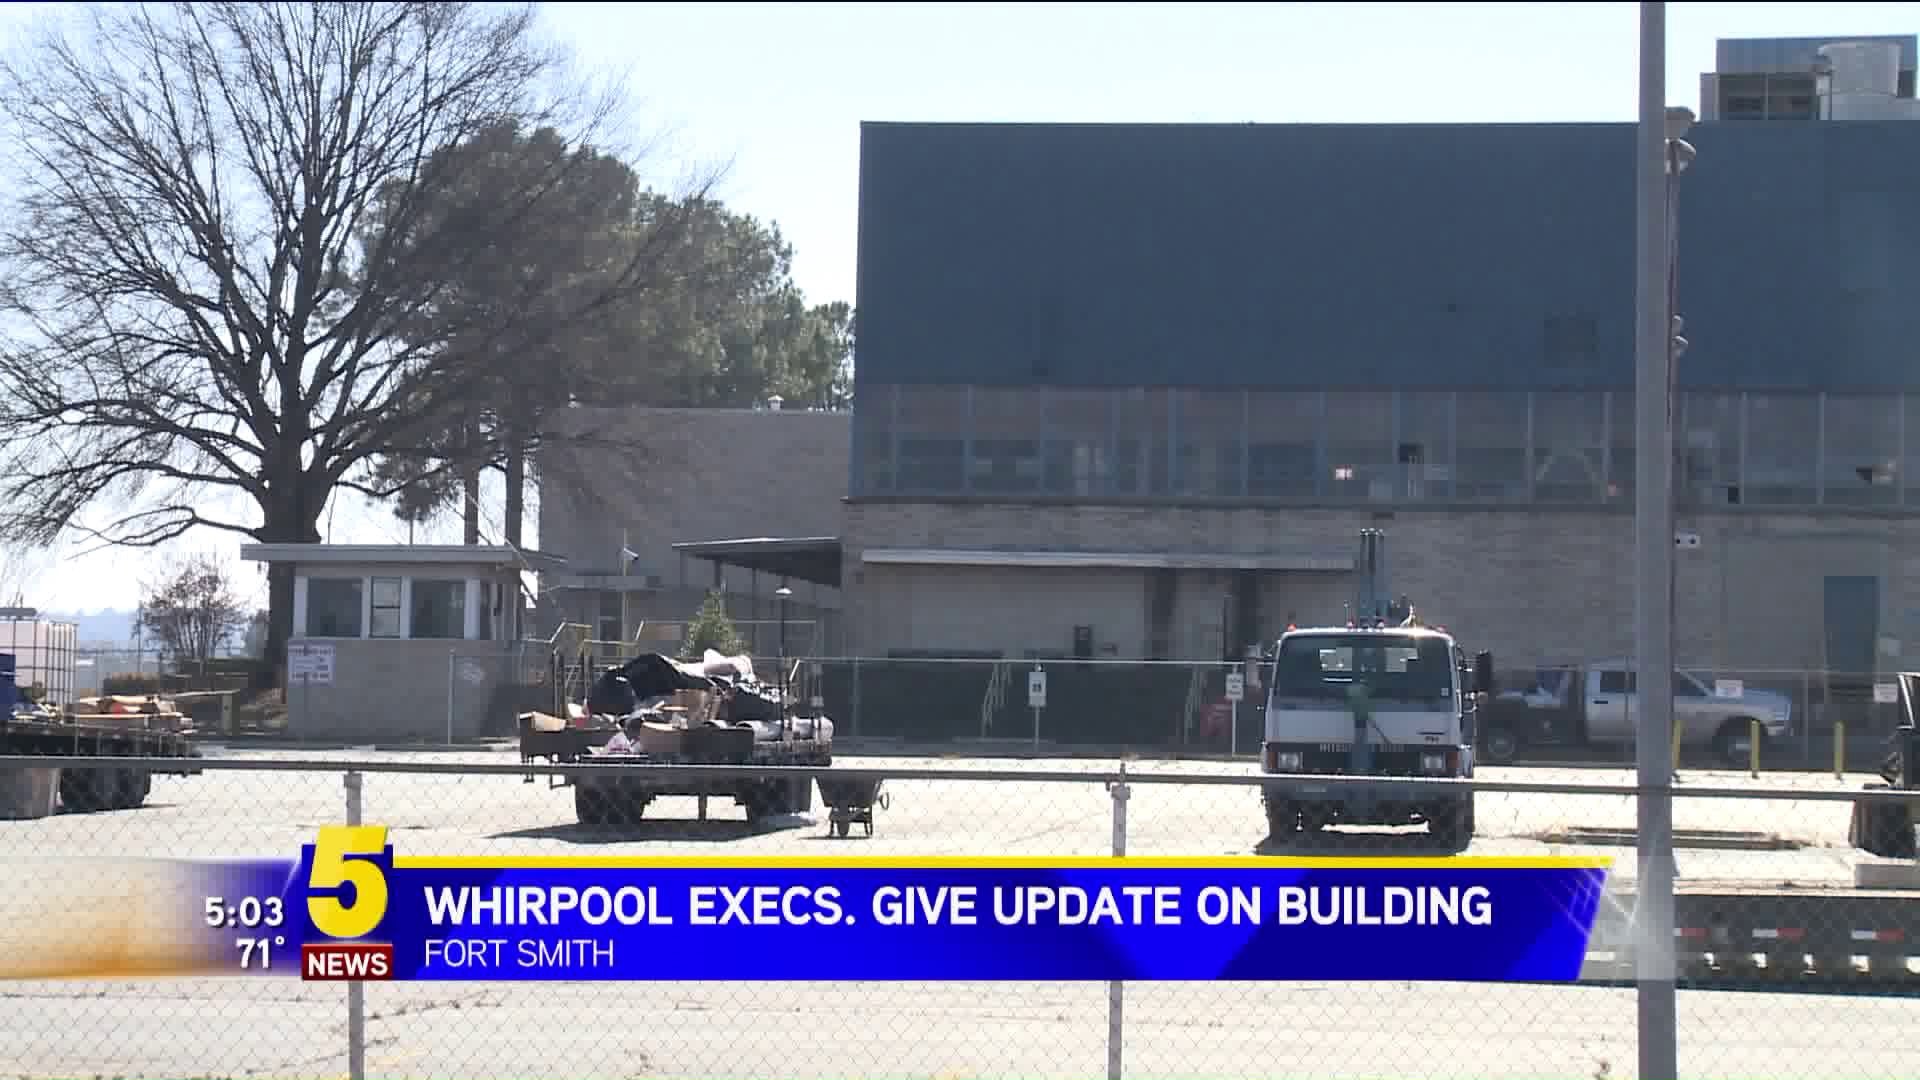 Whirlpool Execs. Give Update On Building